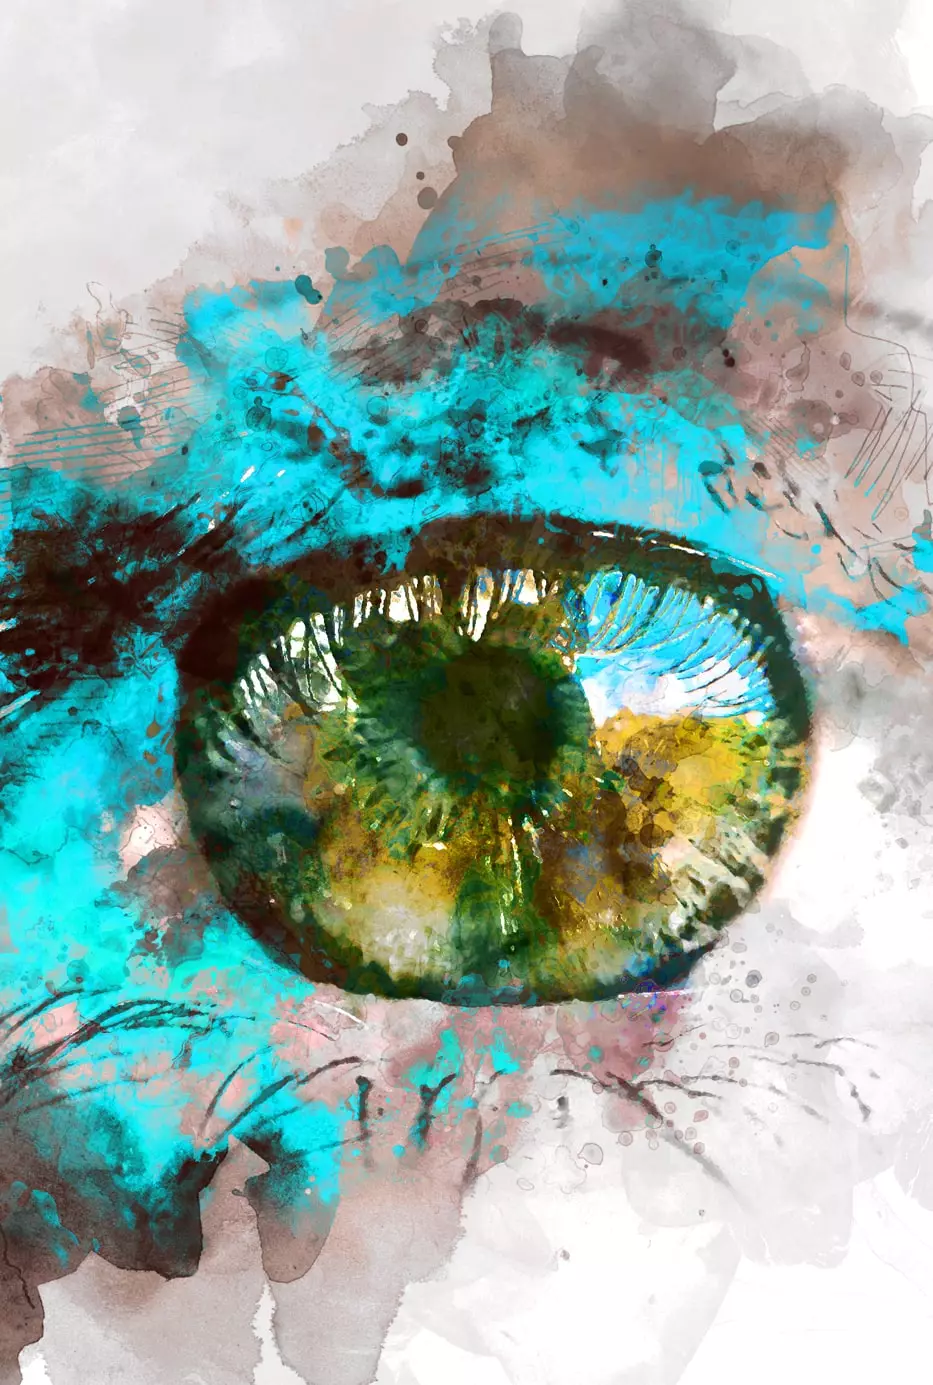 A painted picture with grey background, a green eye looking straight ahead and with a splash of blue color in the picture.